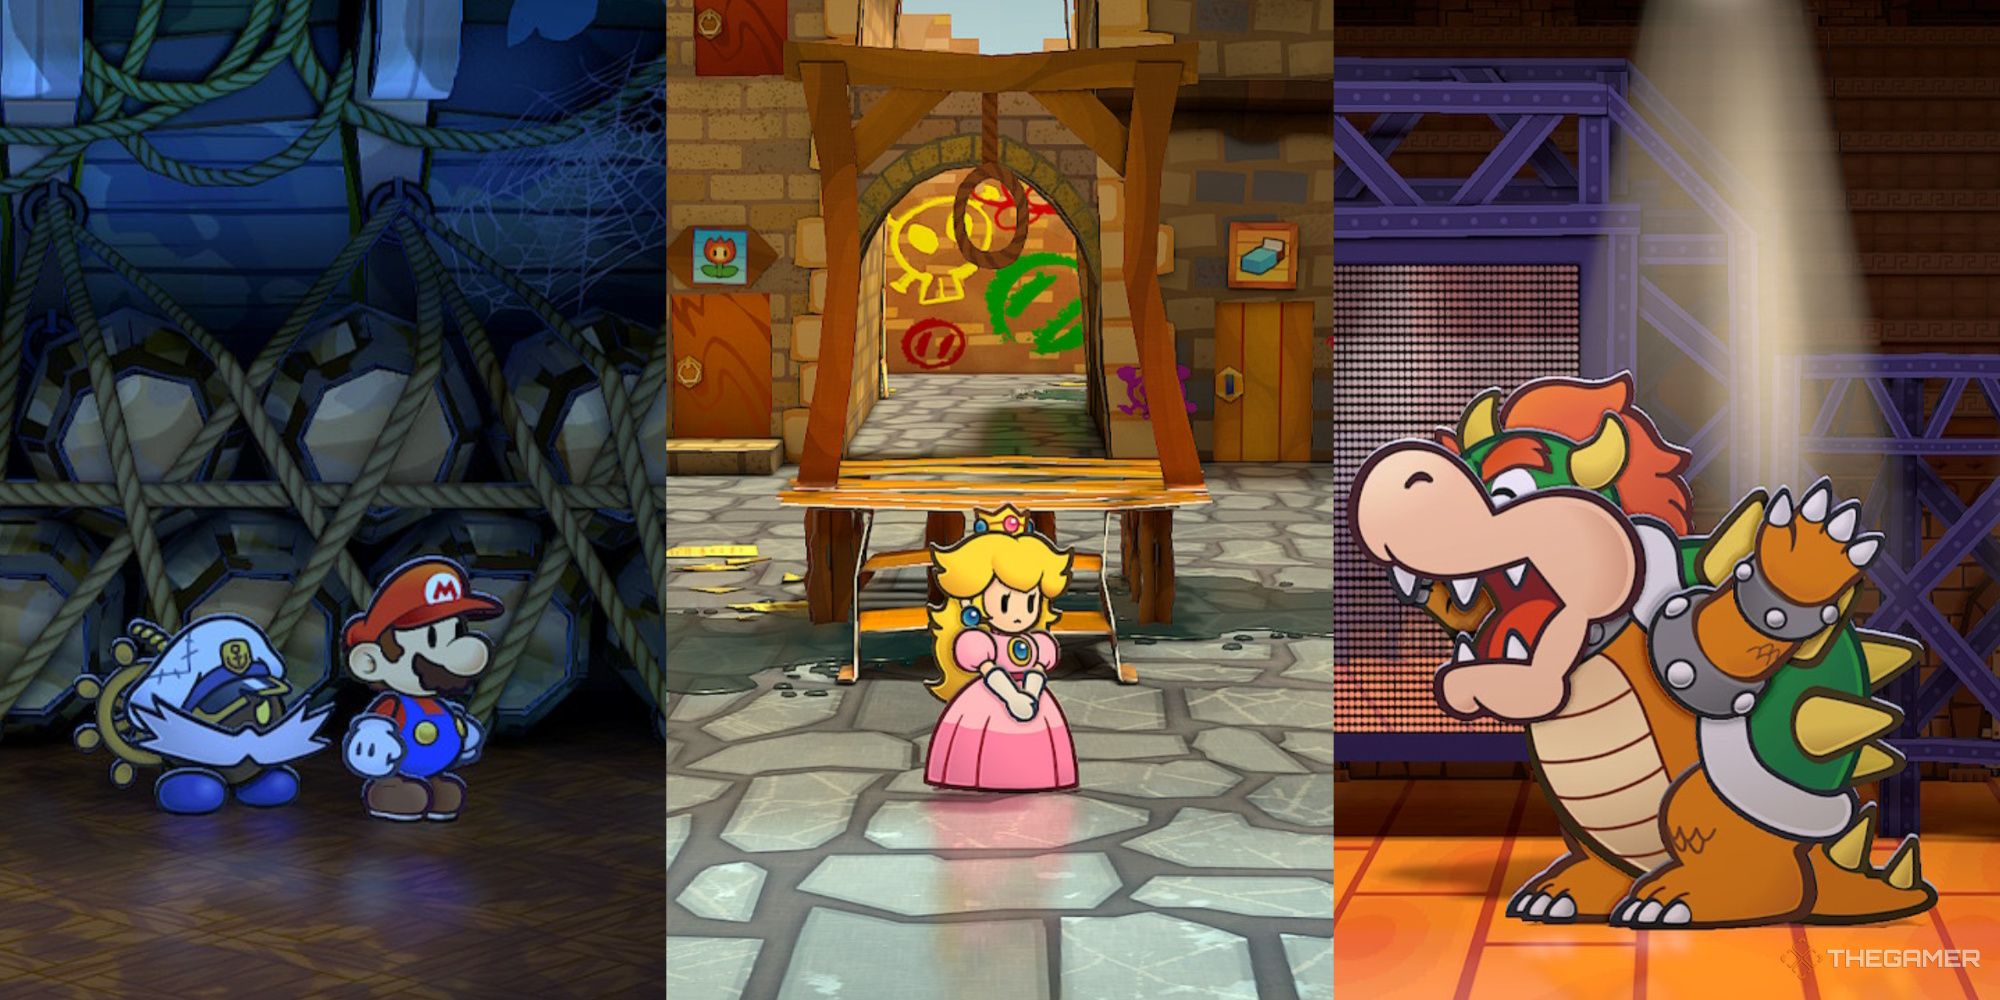 Paper Mario the thousand year door featured image with Mario and Admiral Bobbery, Princess Peach, and Bowser